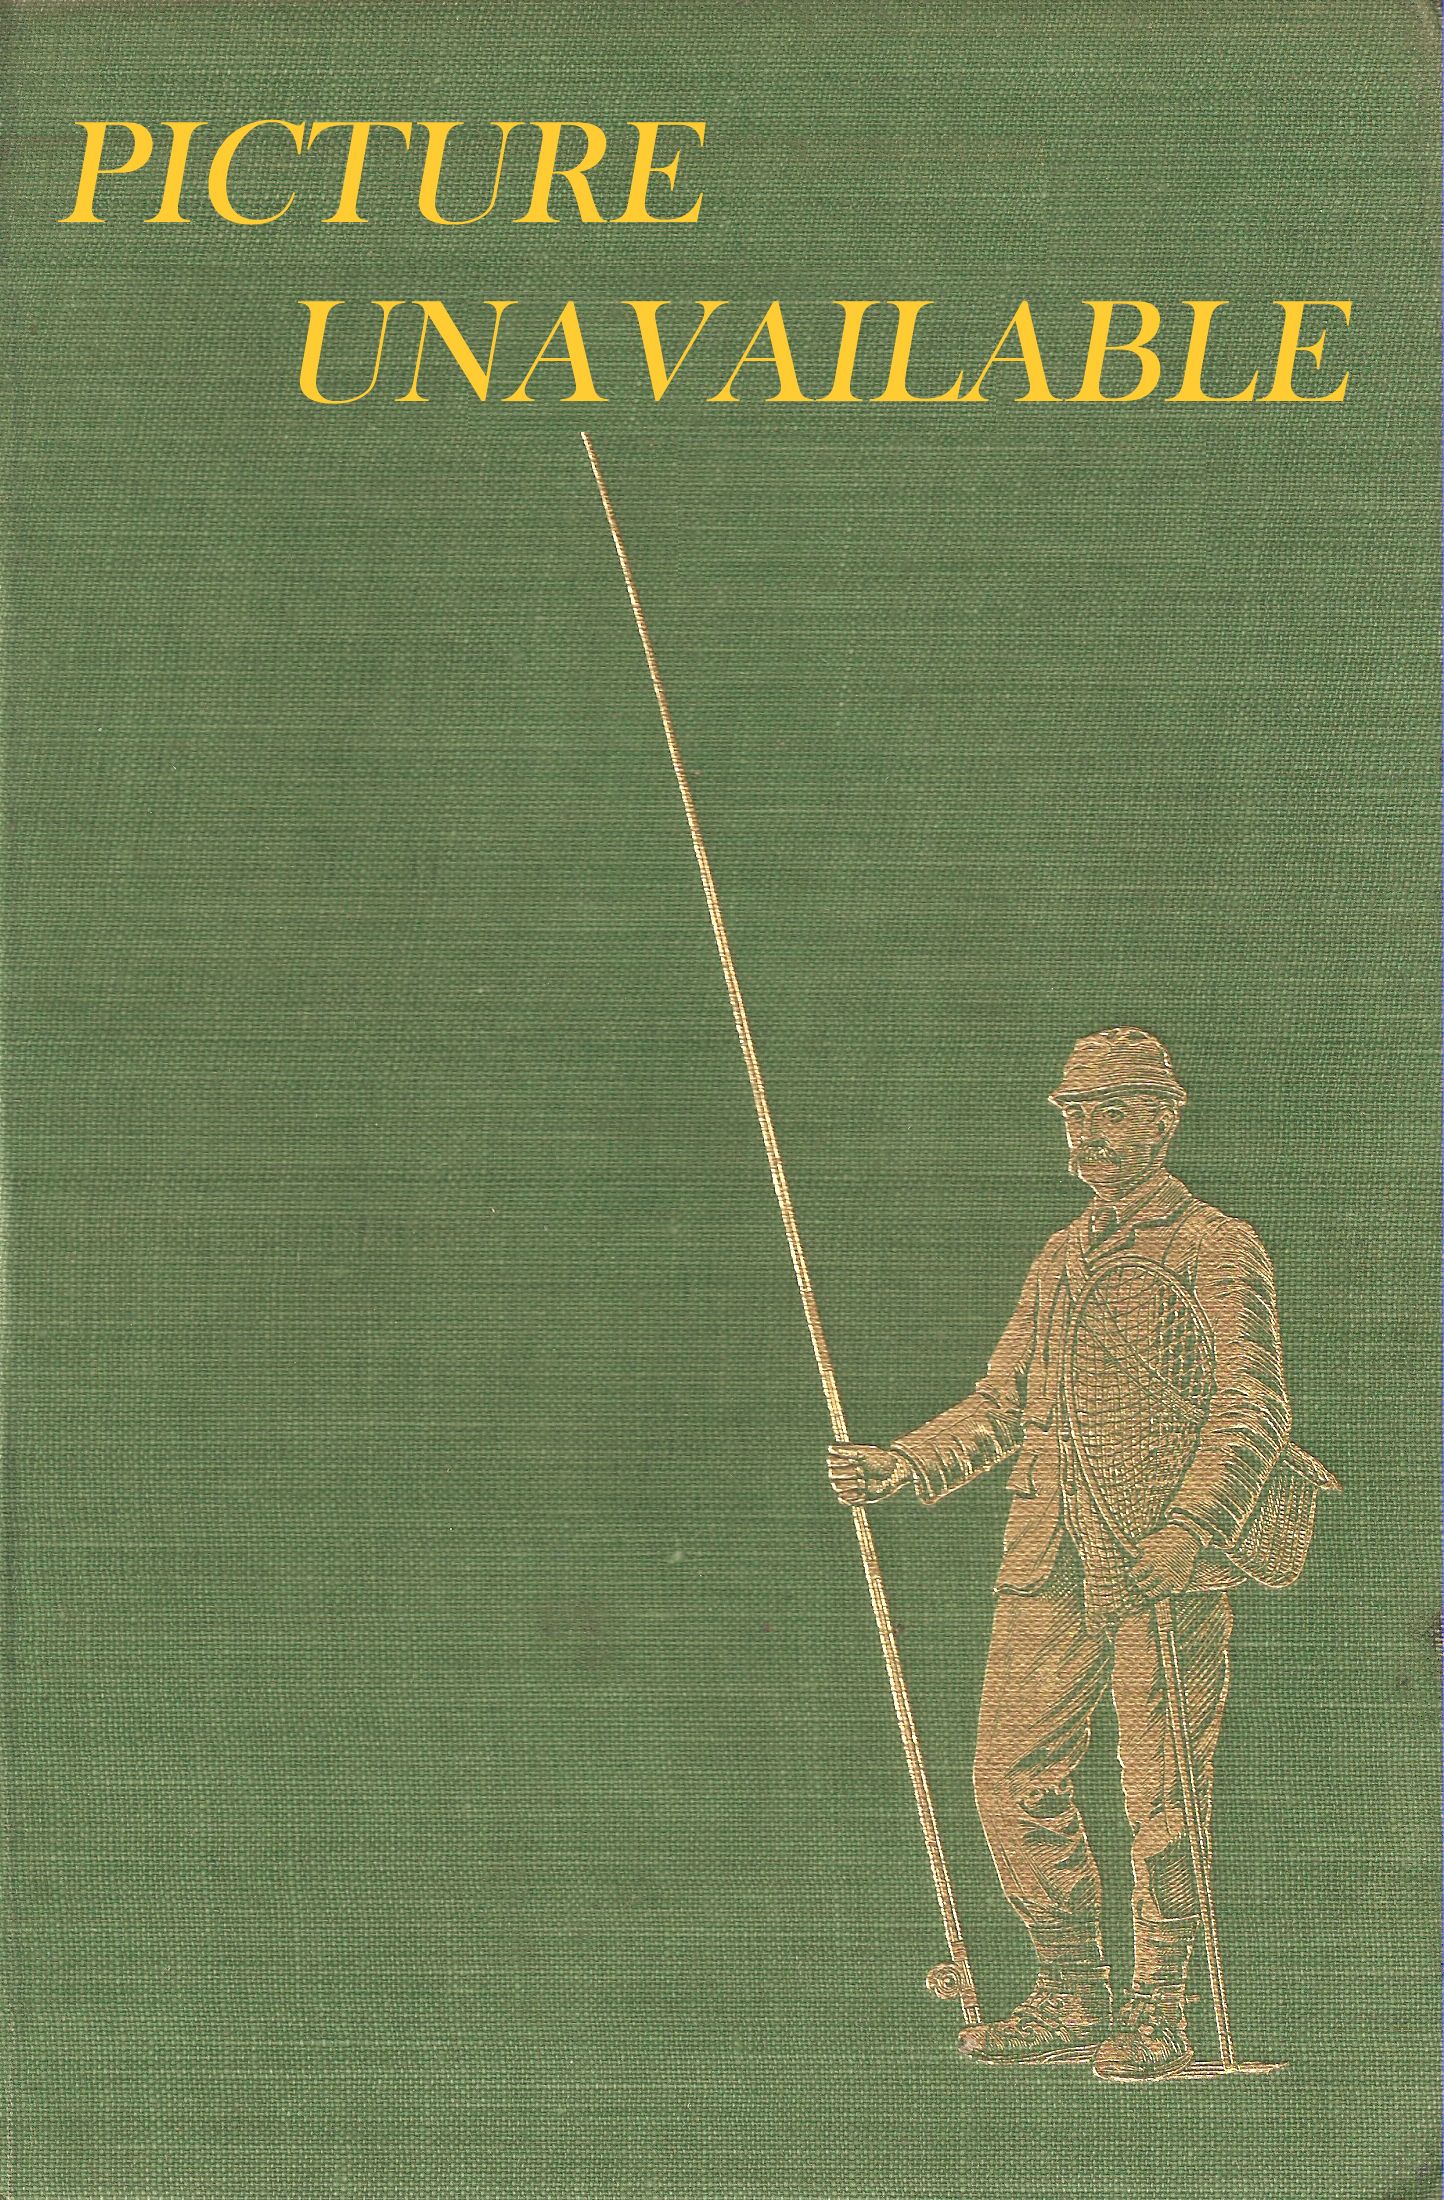 ZANE GREY OUTDOORSMAN: ZANE GREY'S BEST HUNTING AND FISHING TALES  PUBLISHED IN COMMEMORATION OF HIS CENTENNIAL YEAR.